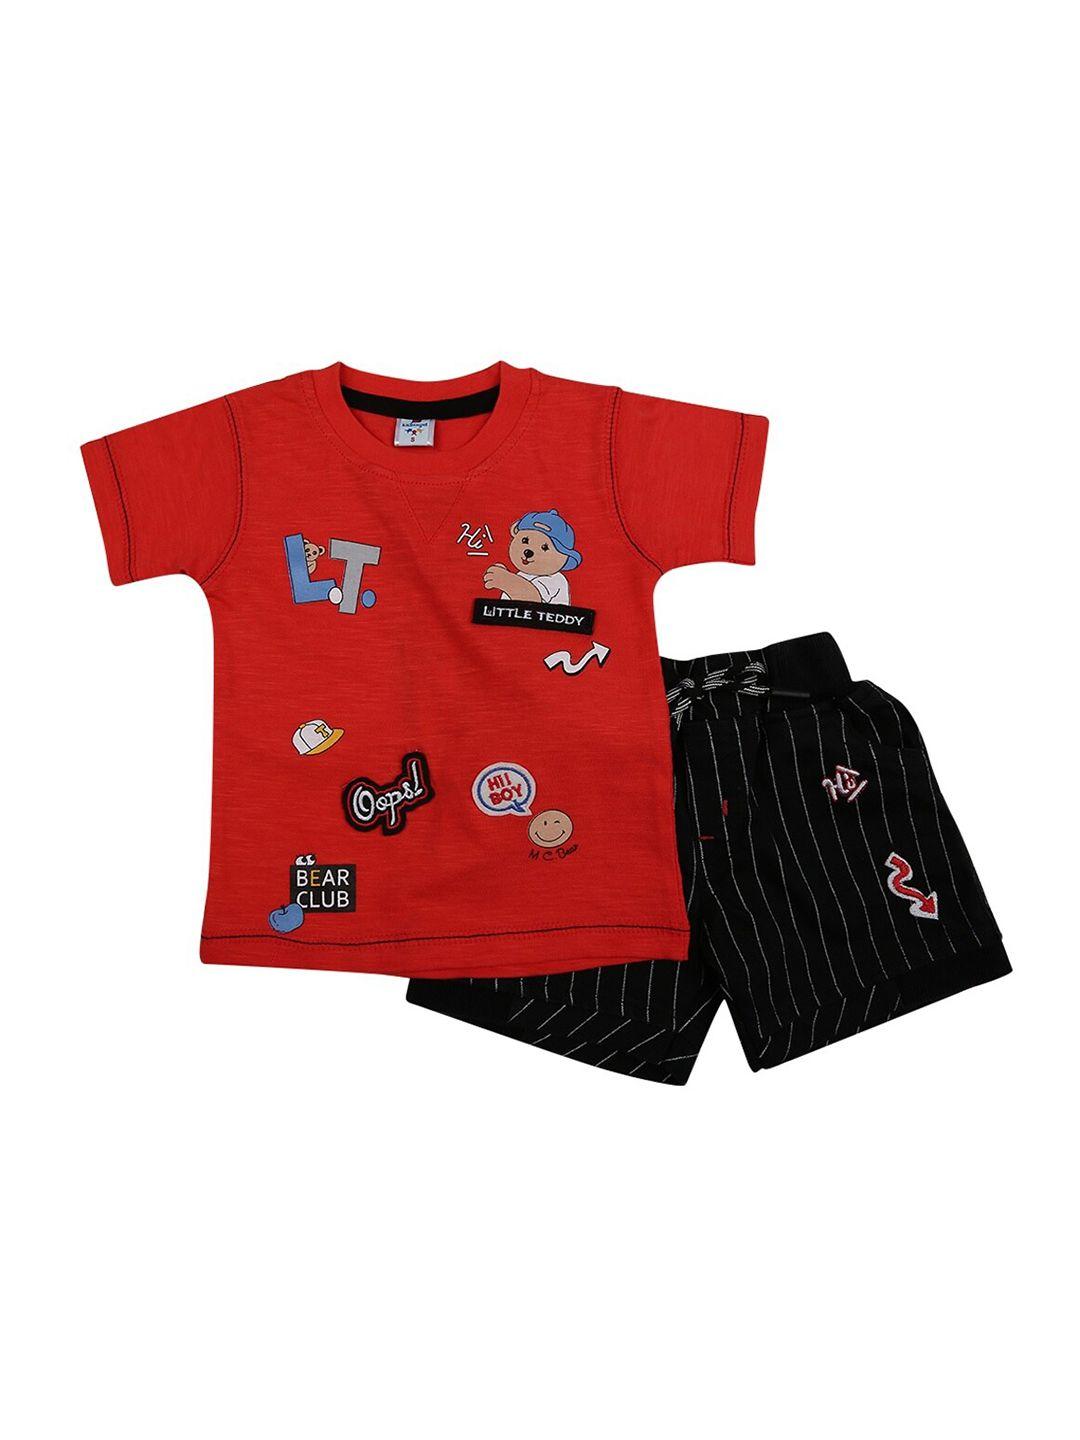 v-mart unisex kids red printed t-shirt with shorts